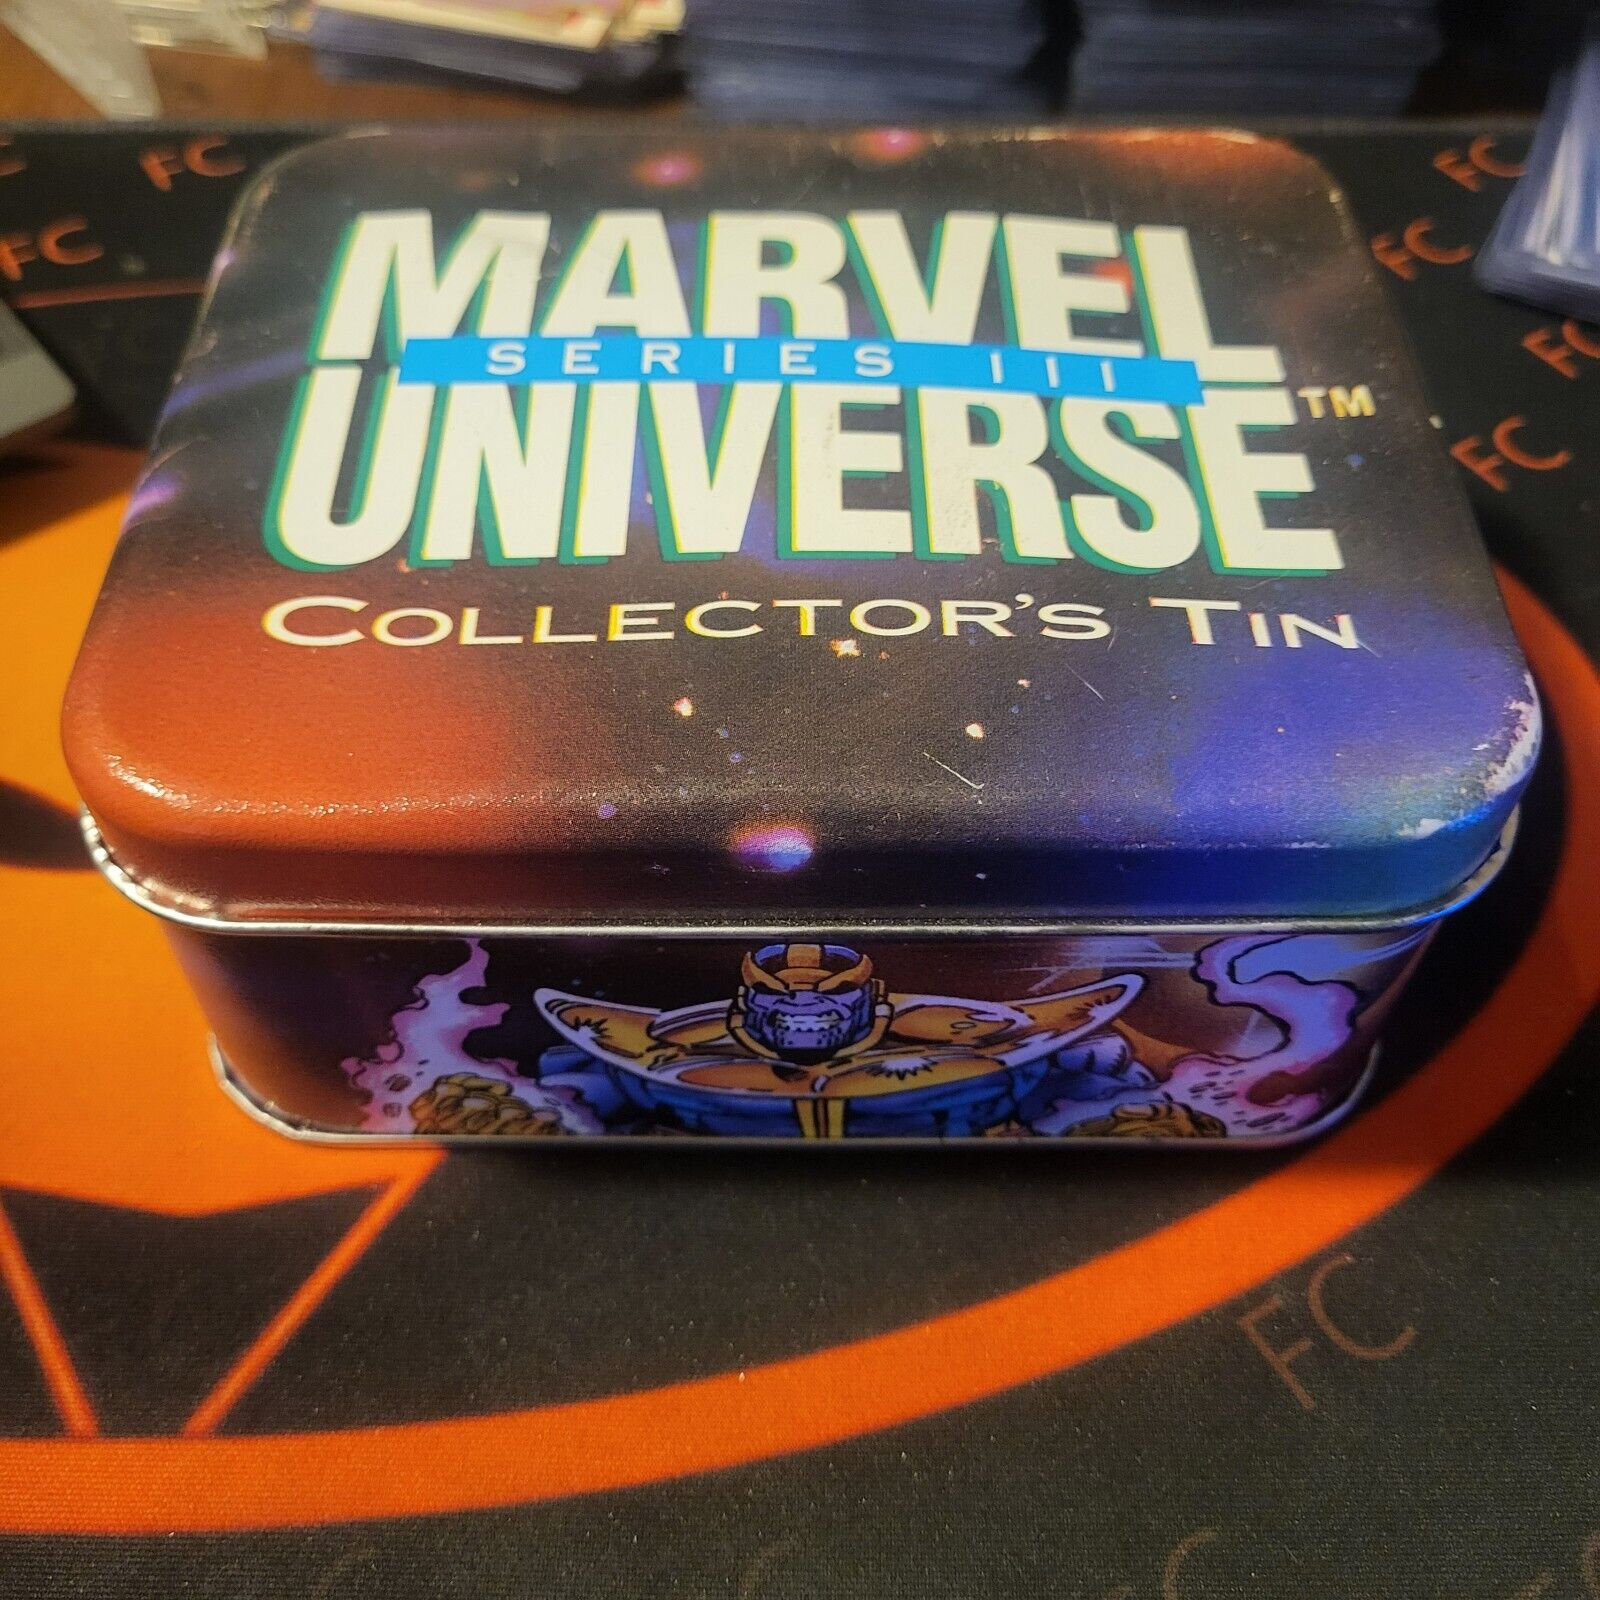 Marvel Universe Series 3 Collectors Tin With Cards Open Great Condition 1992 